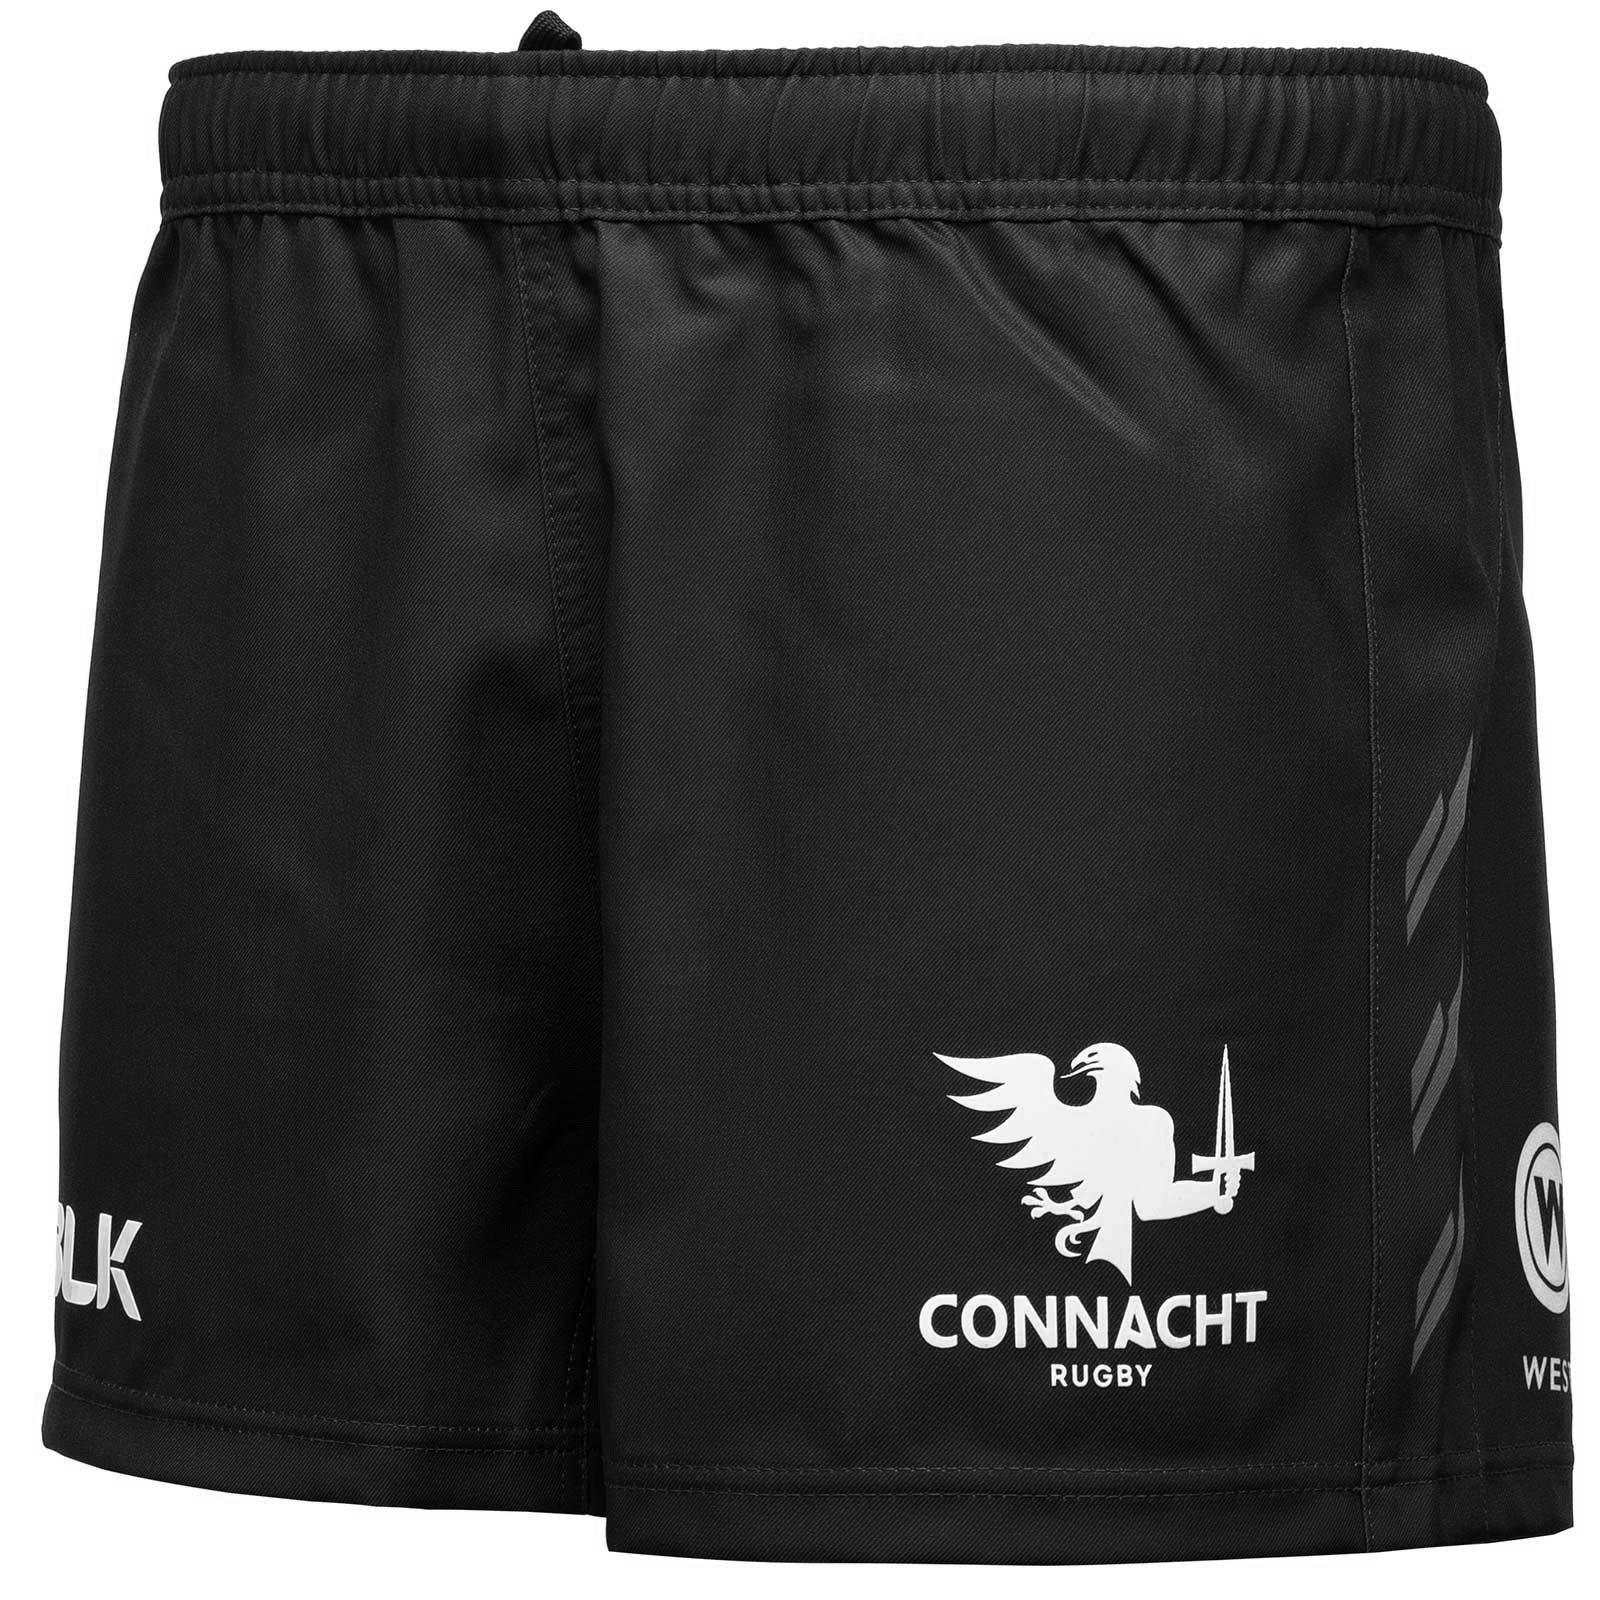 BLK CONNACHT RUGBY 2022/23 AWAY SHORTS